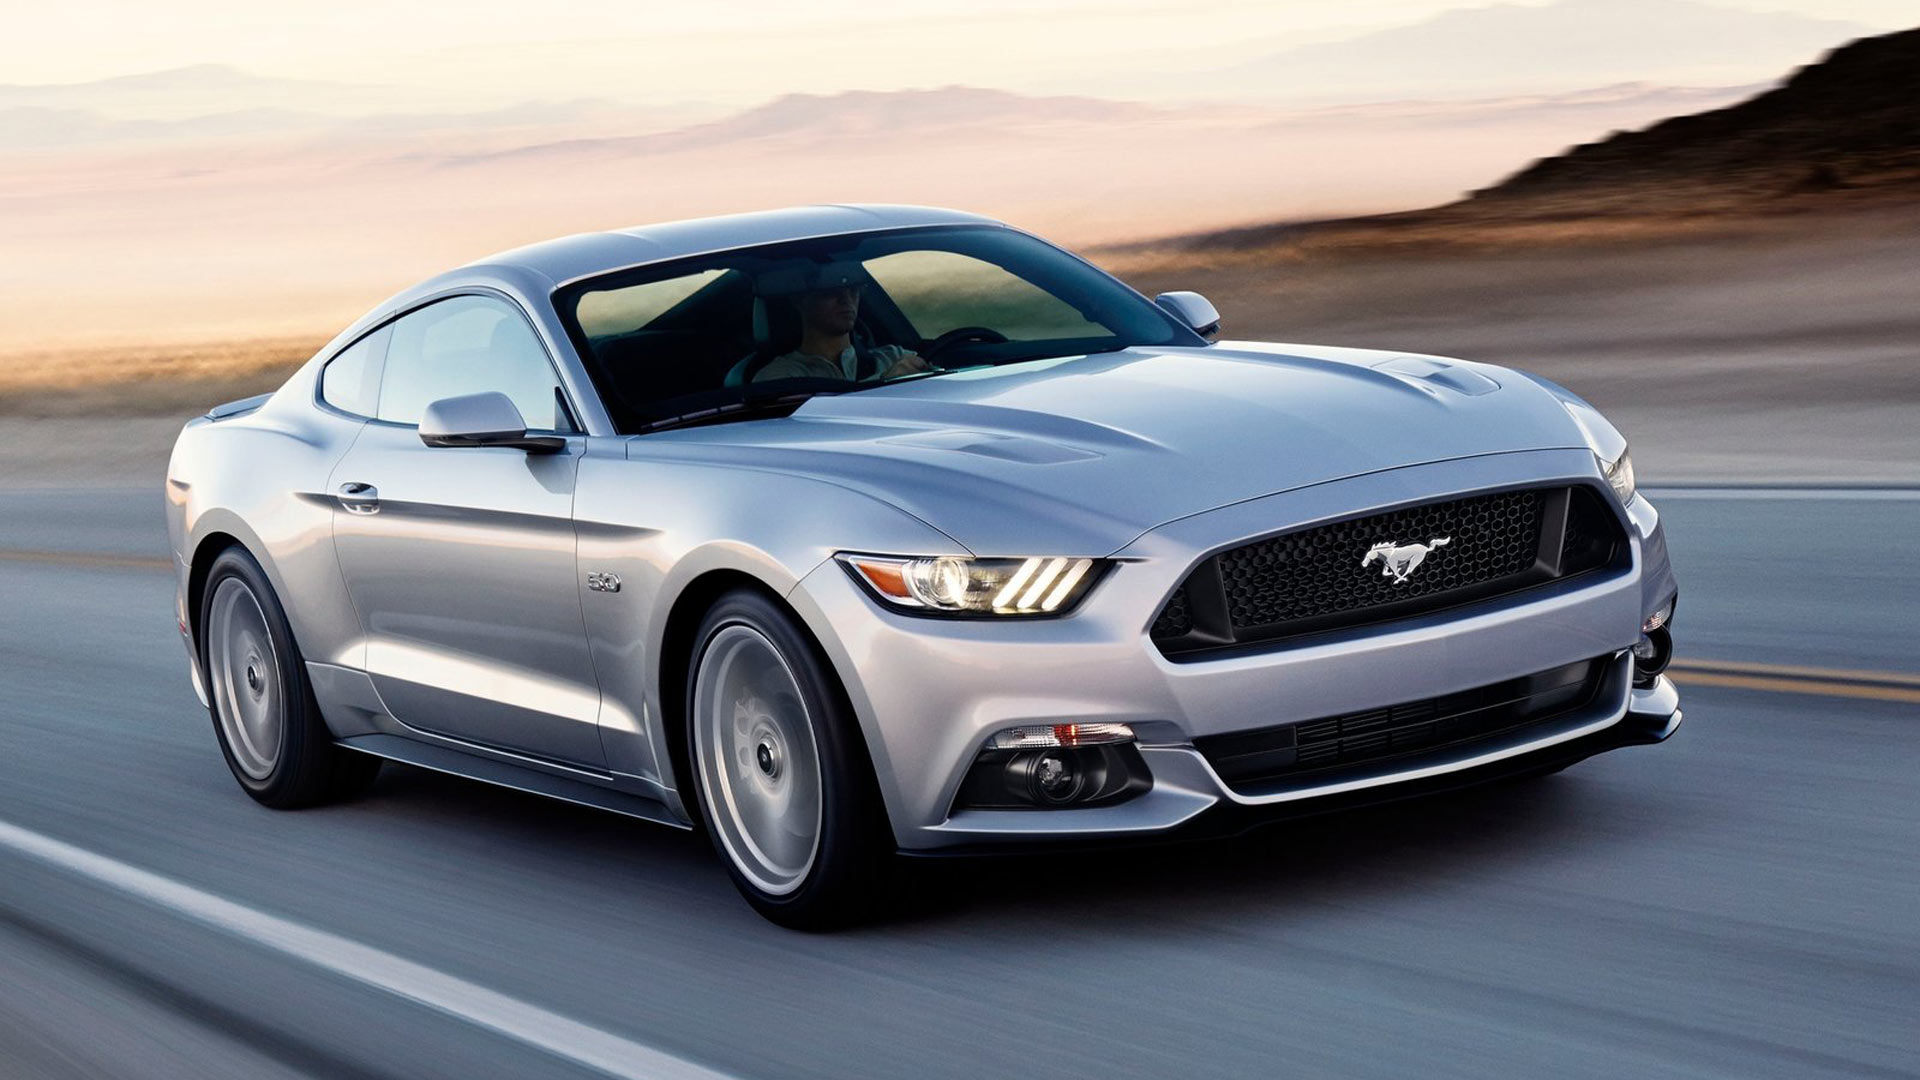 Sixth-generation Ford Mustang